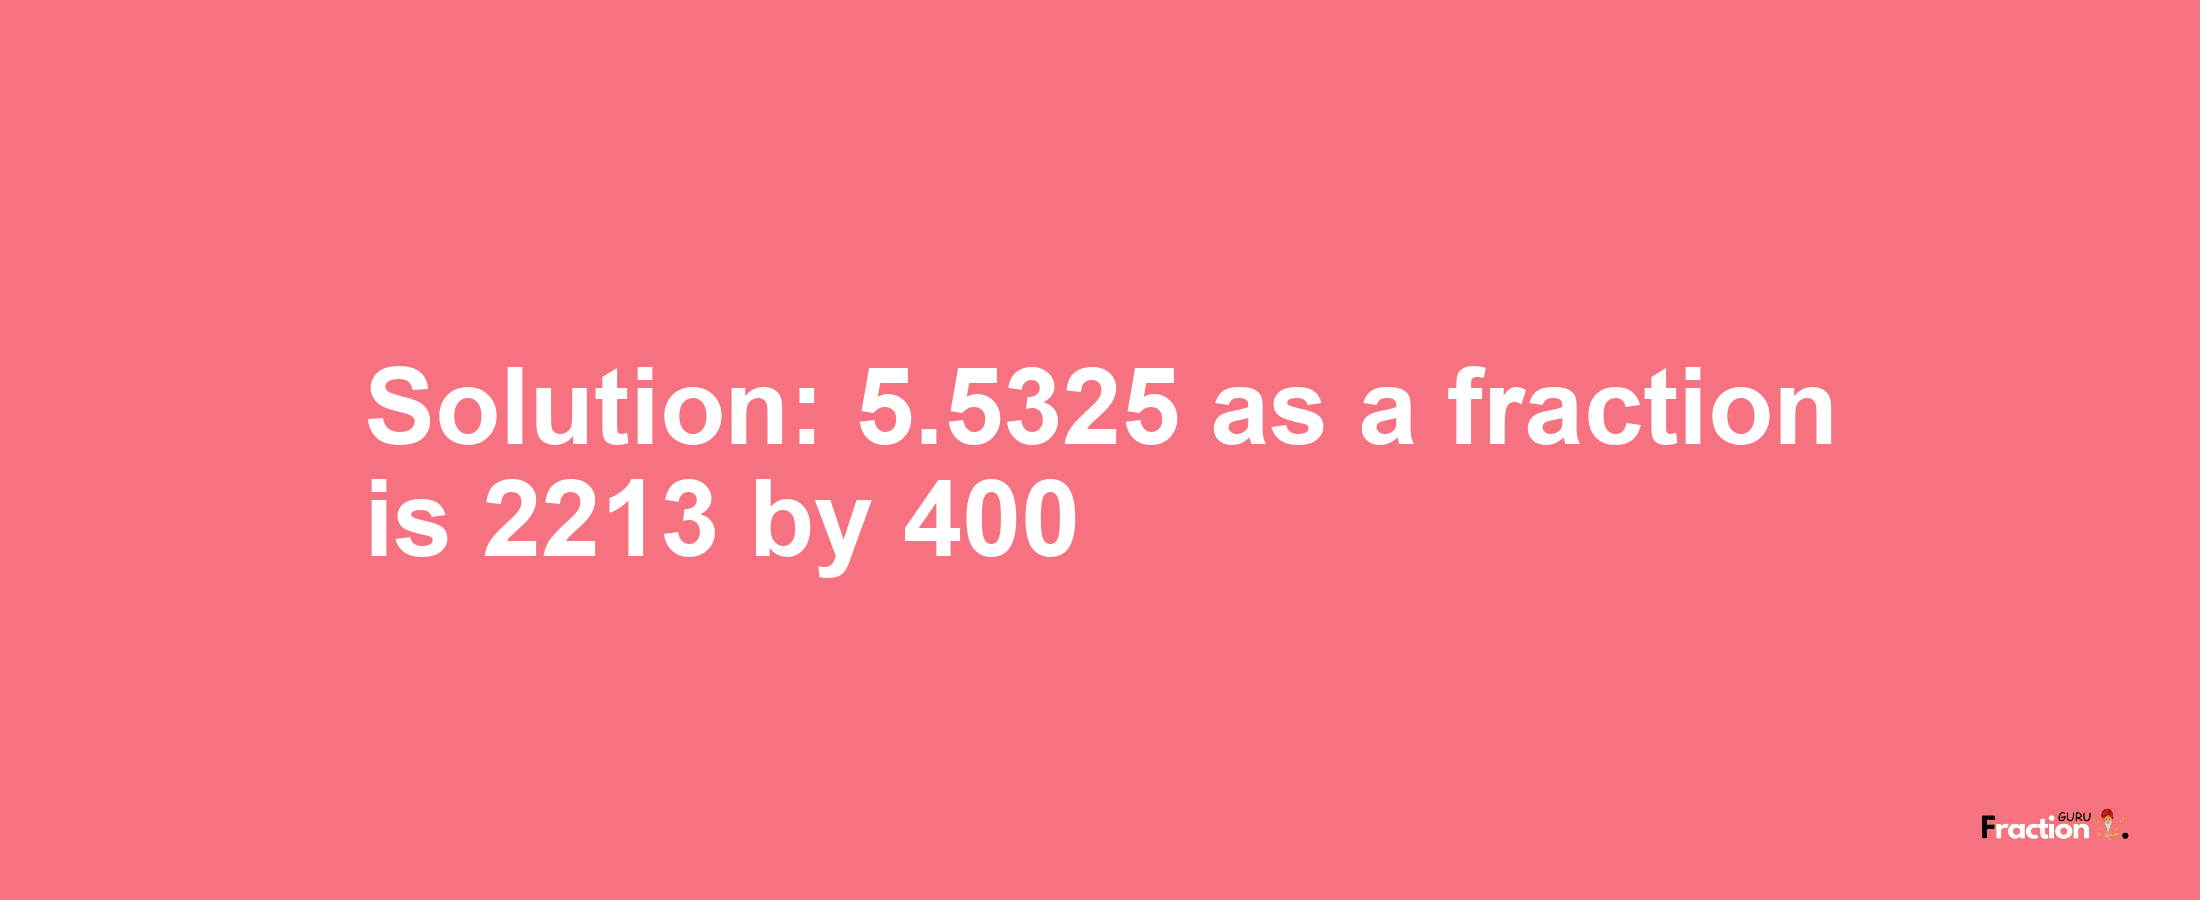 Solution:5.5325 as a fraction is 2213/400